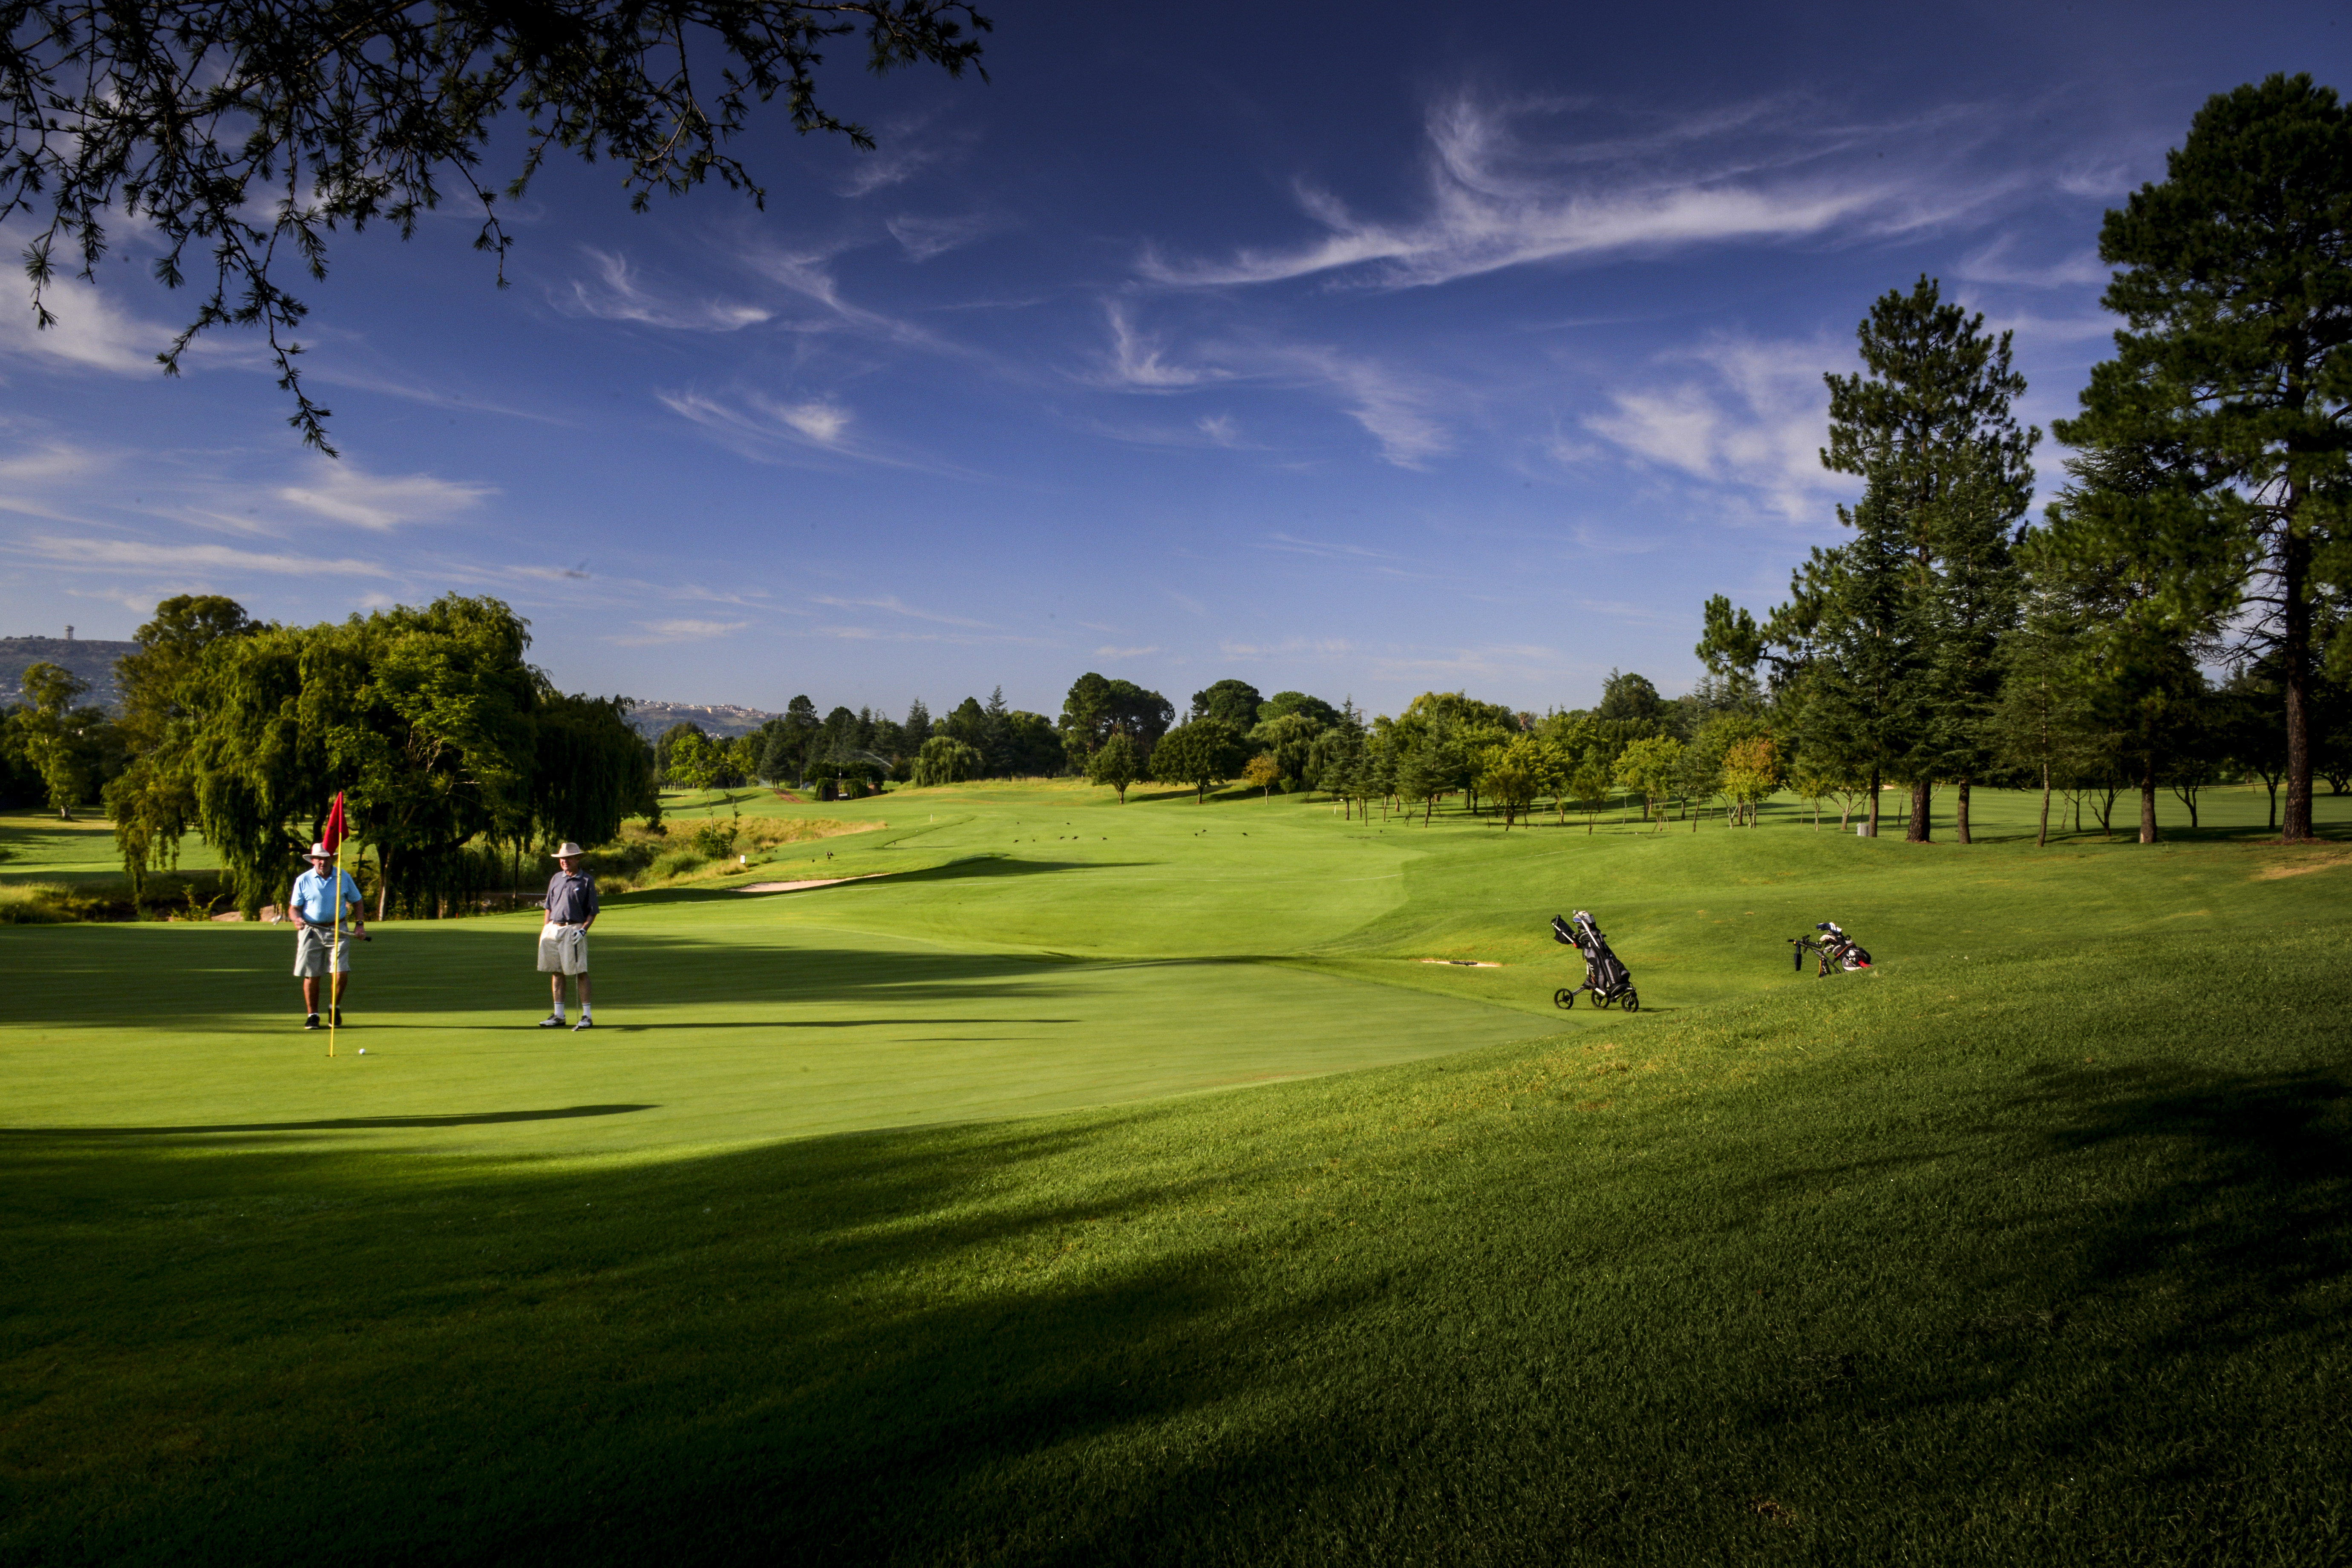  Randpark Golf Club wins Best Golf Course in Best of Joburg Readers’ Choice Awards 2016